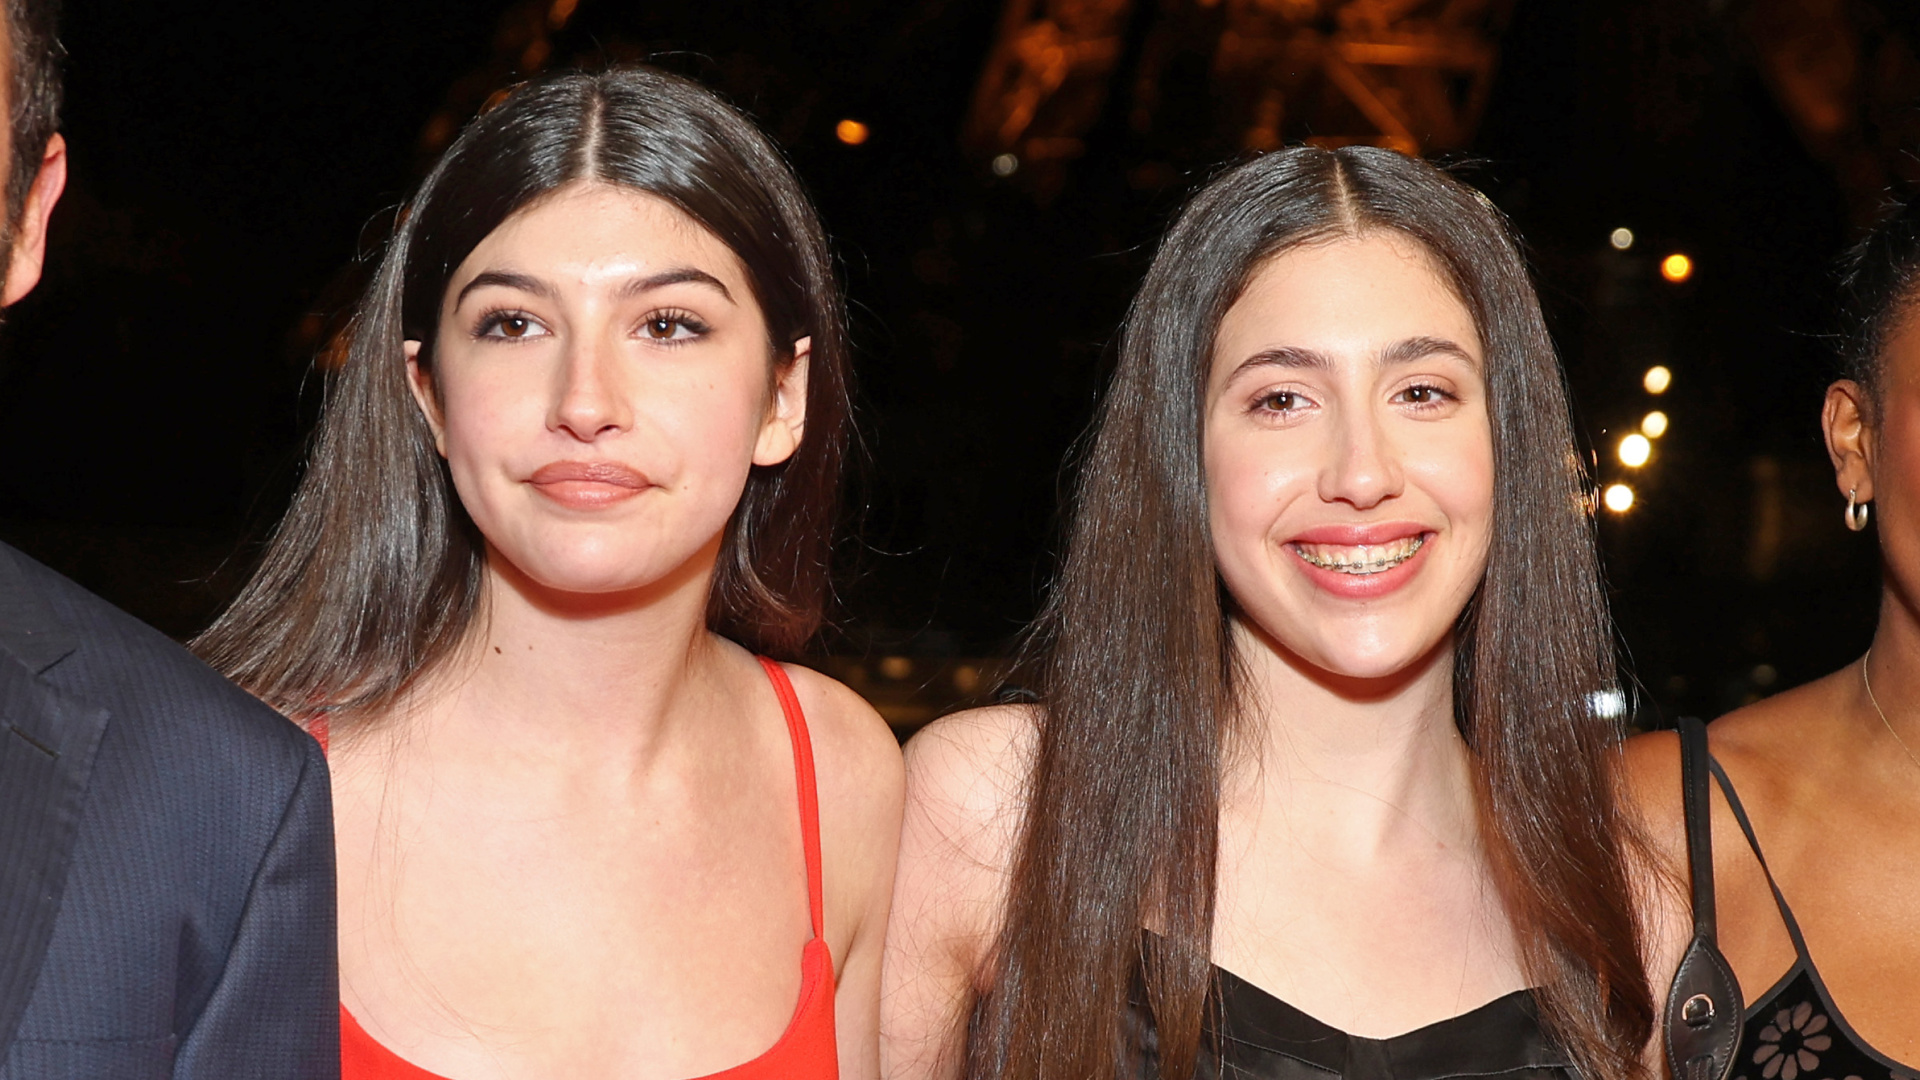 Do you know Adam Sandler's daughters?